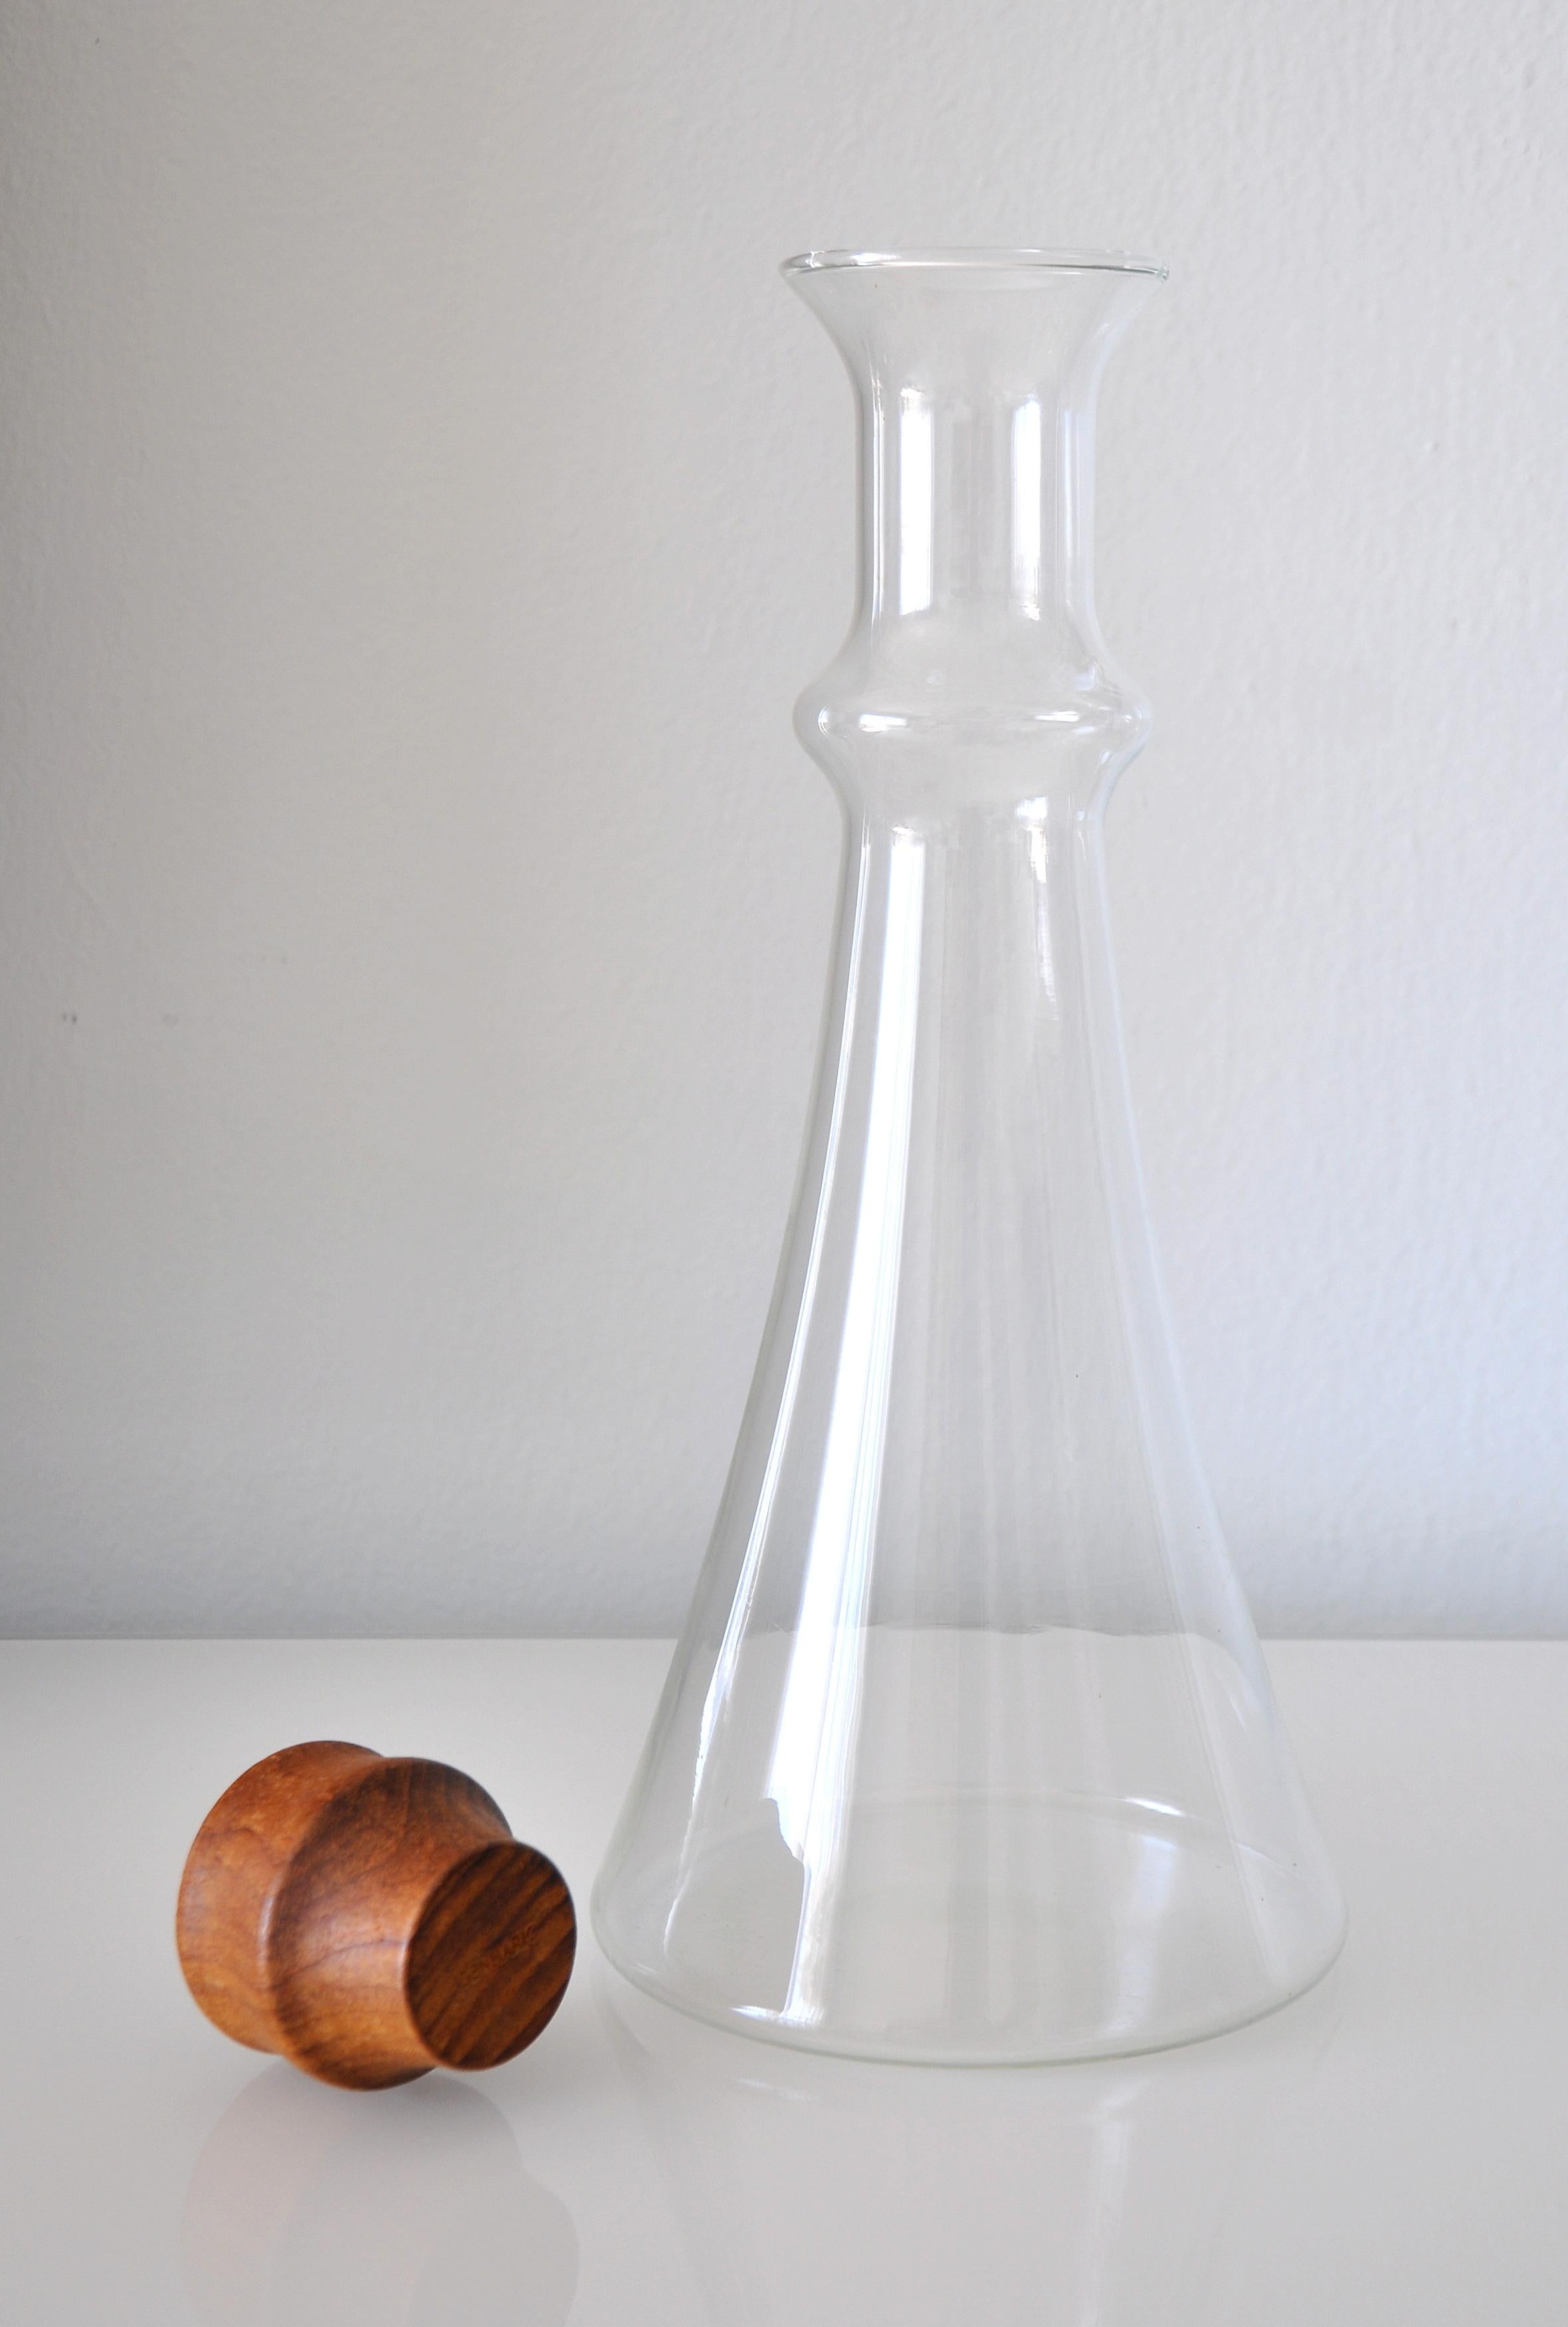 Made in Denmark. Vintage glass decanter designed by Gunnar Cyrén, circa 1980. Tall, beaker shaped pitcher with a sculpted teak stopper is the stylish way to serve wine or water. The carafe holds 1.5 liters.